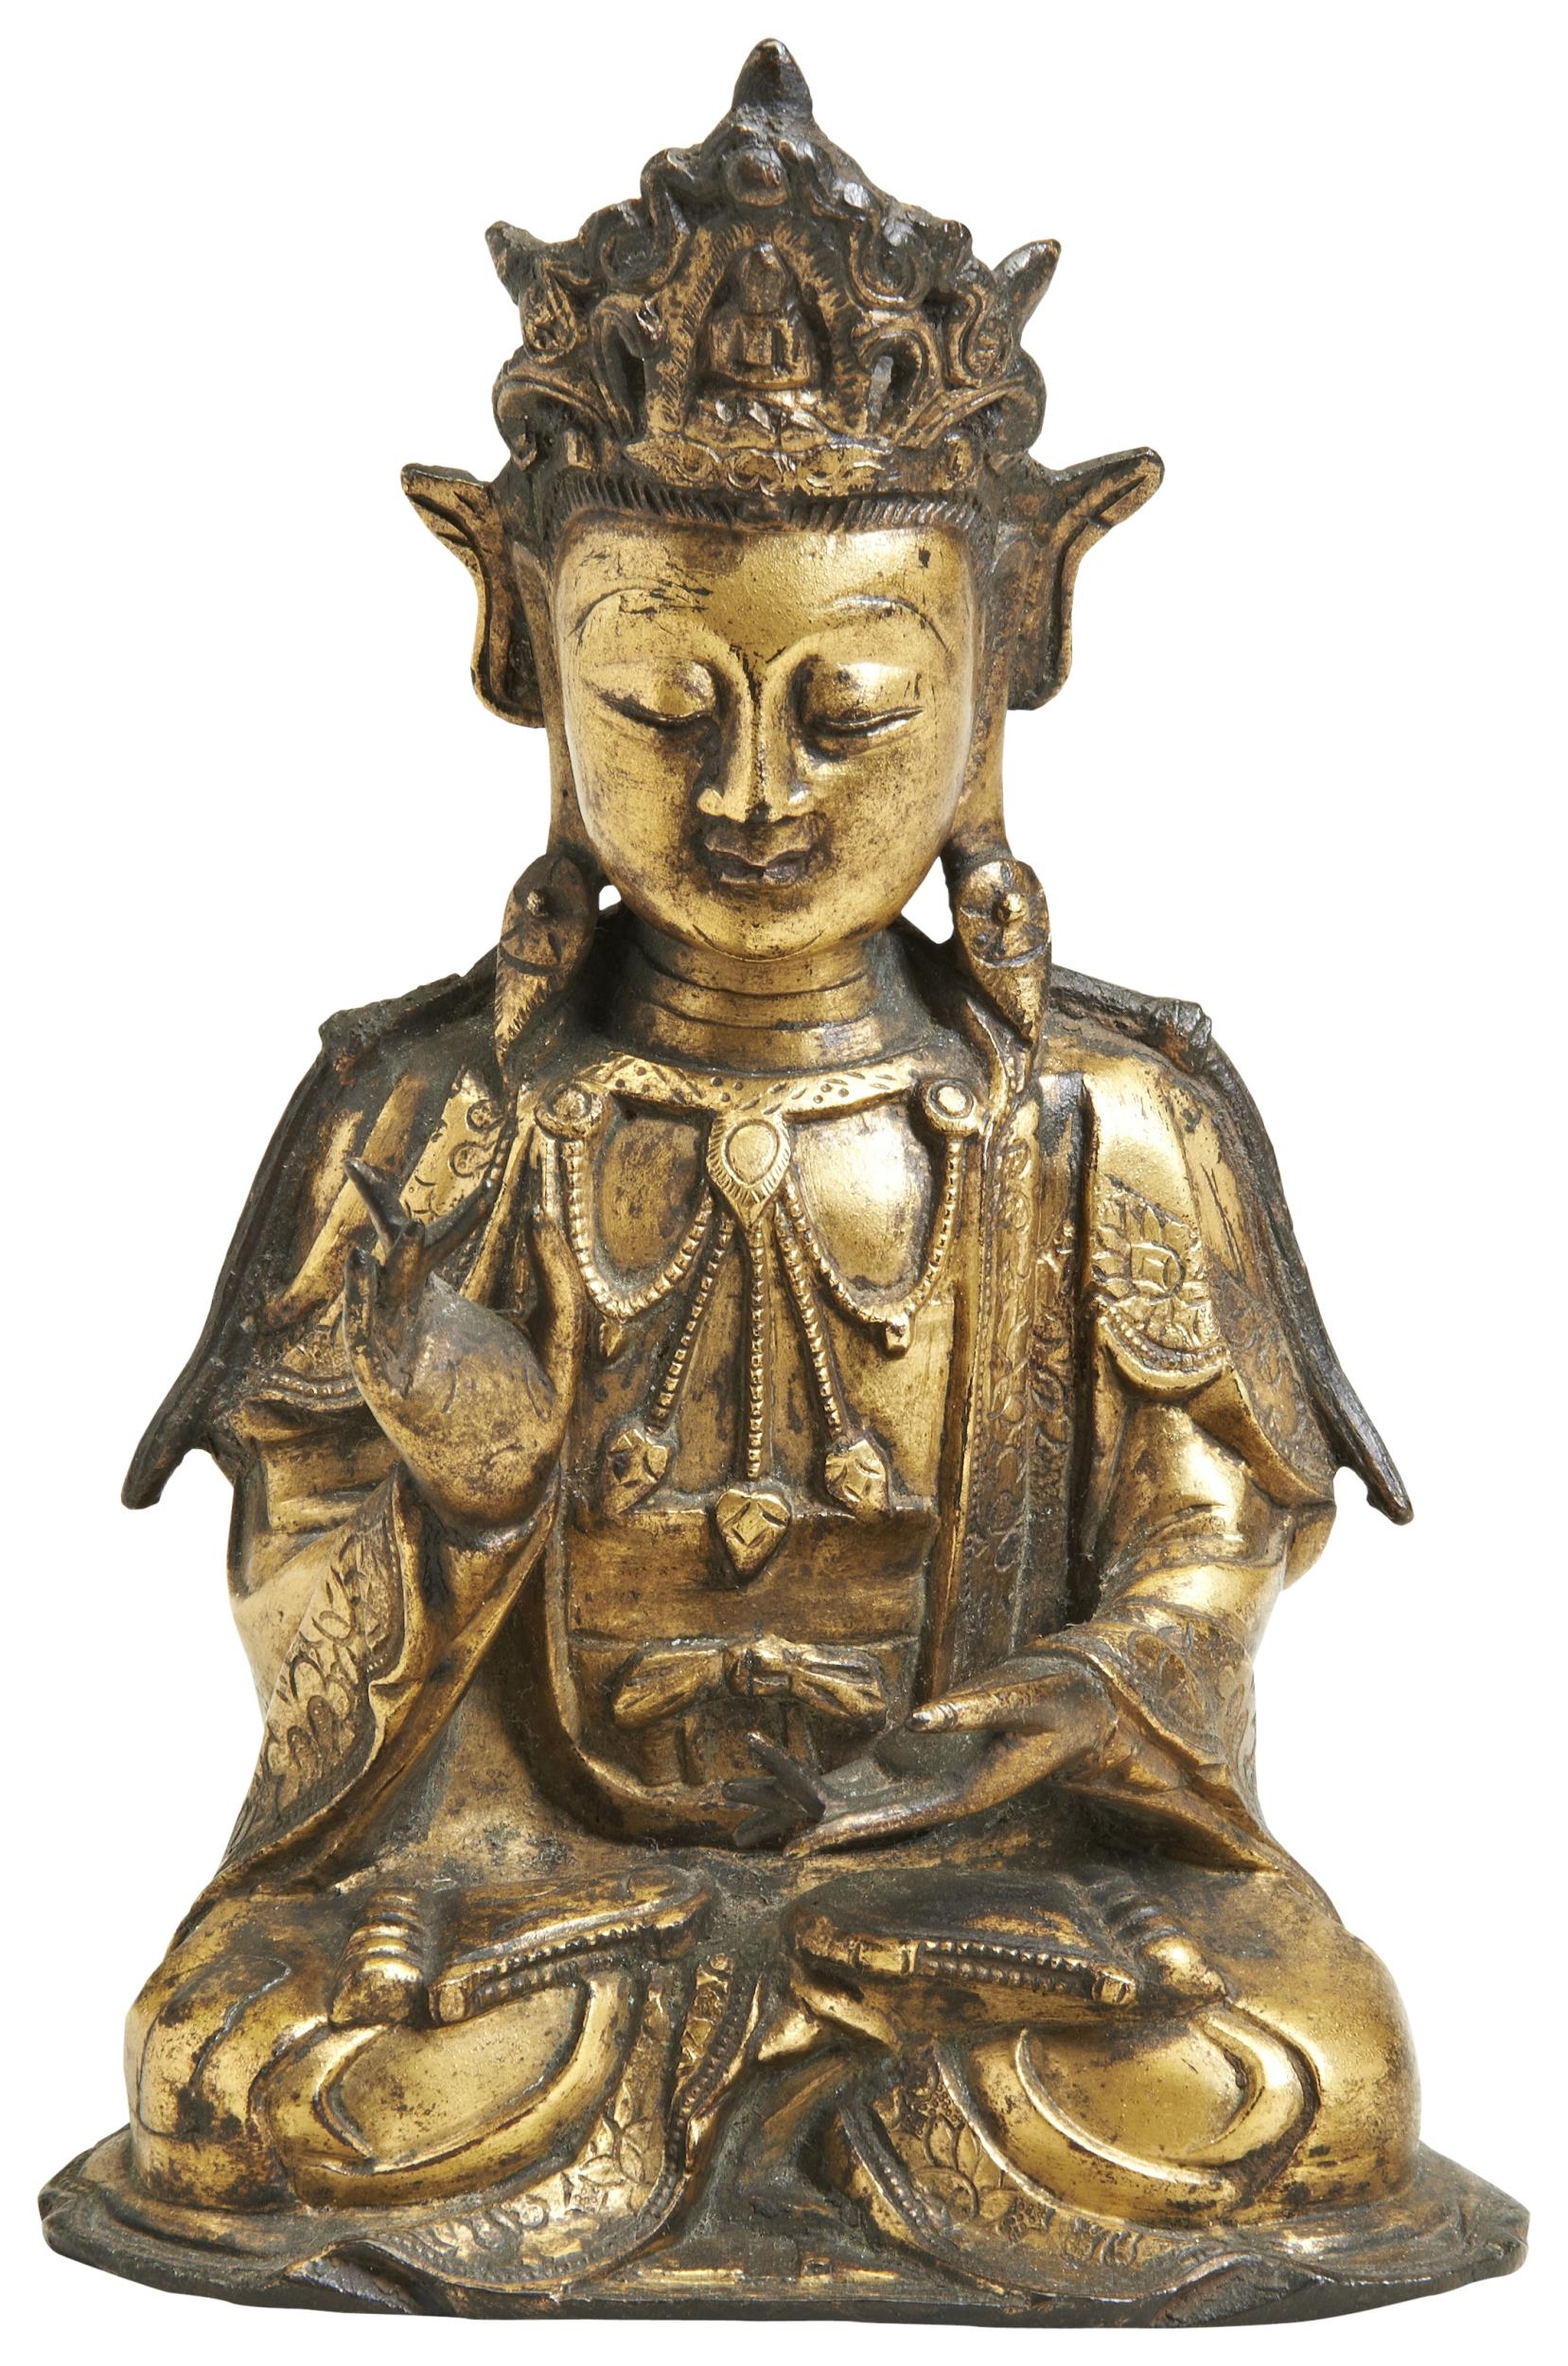 A GILT BRONZE FIGURE OF GUANYIN LATE MING DYNASTY seated in padmasana, dressed in long robes